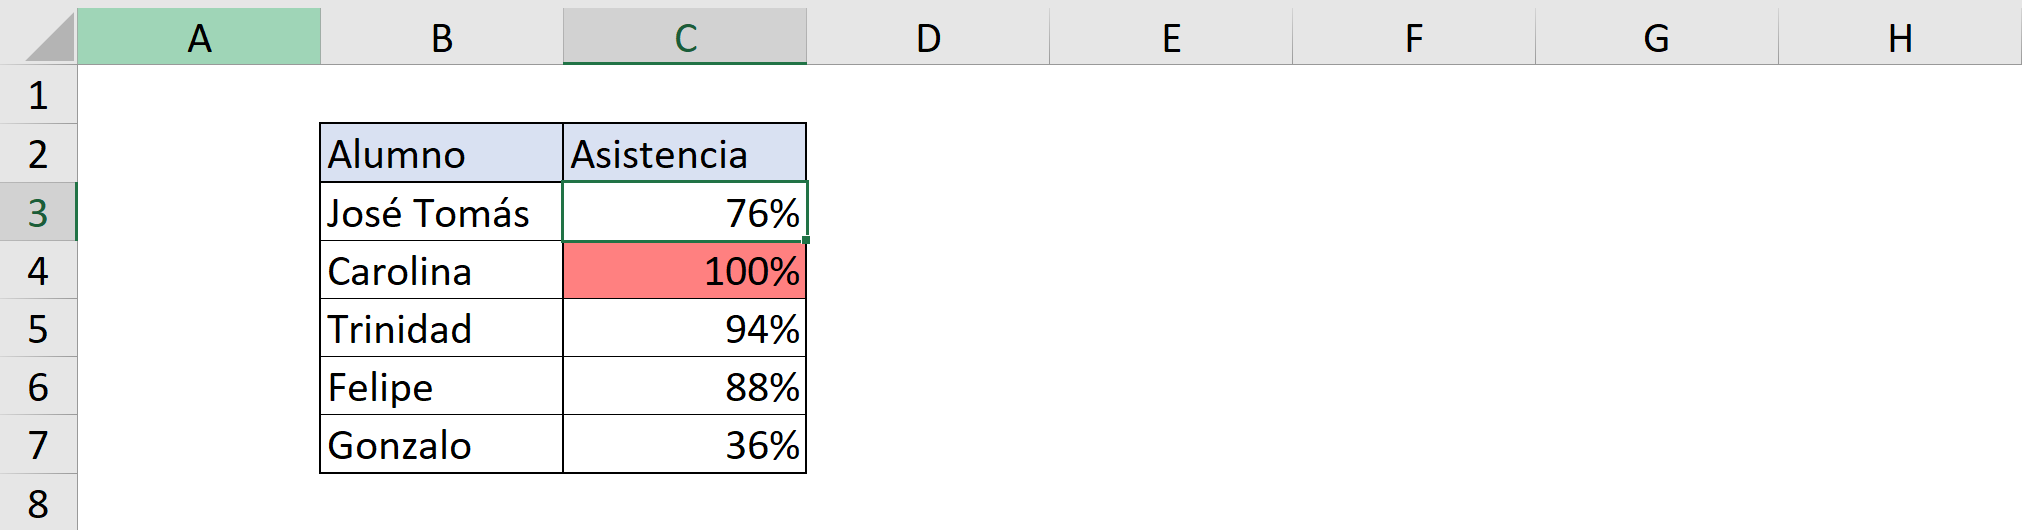 Example of applying VBA Loops in Excel. Find and mark the maximum.